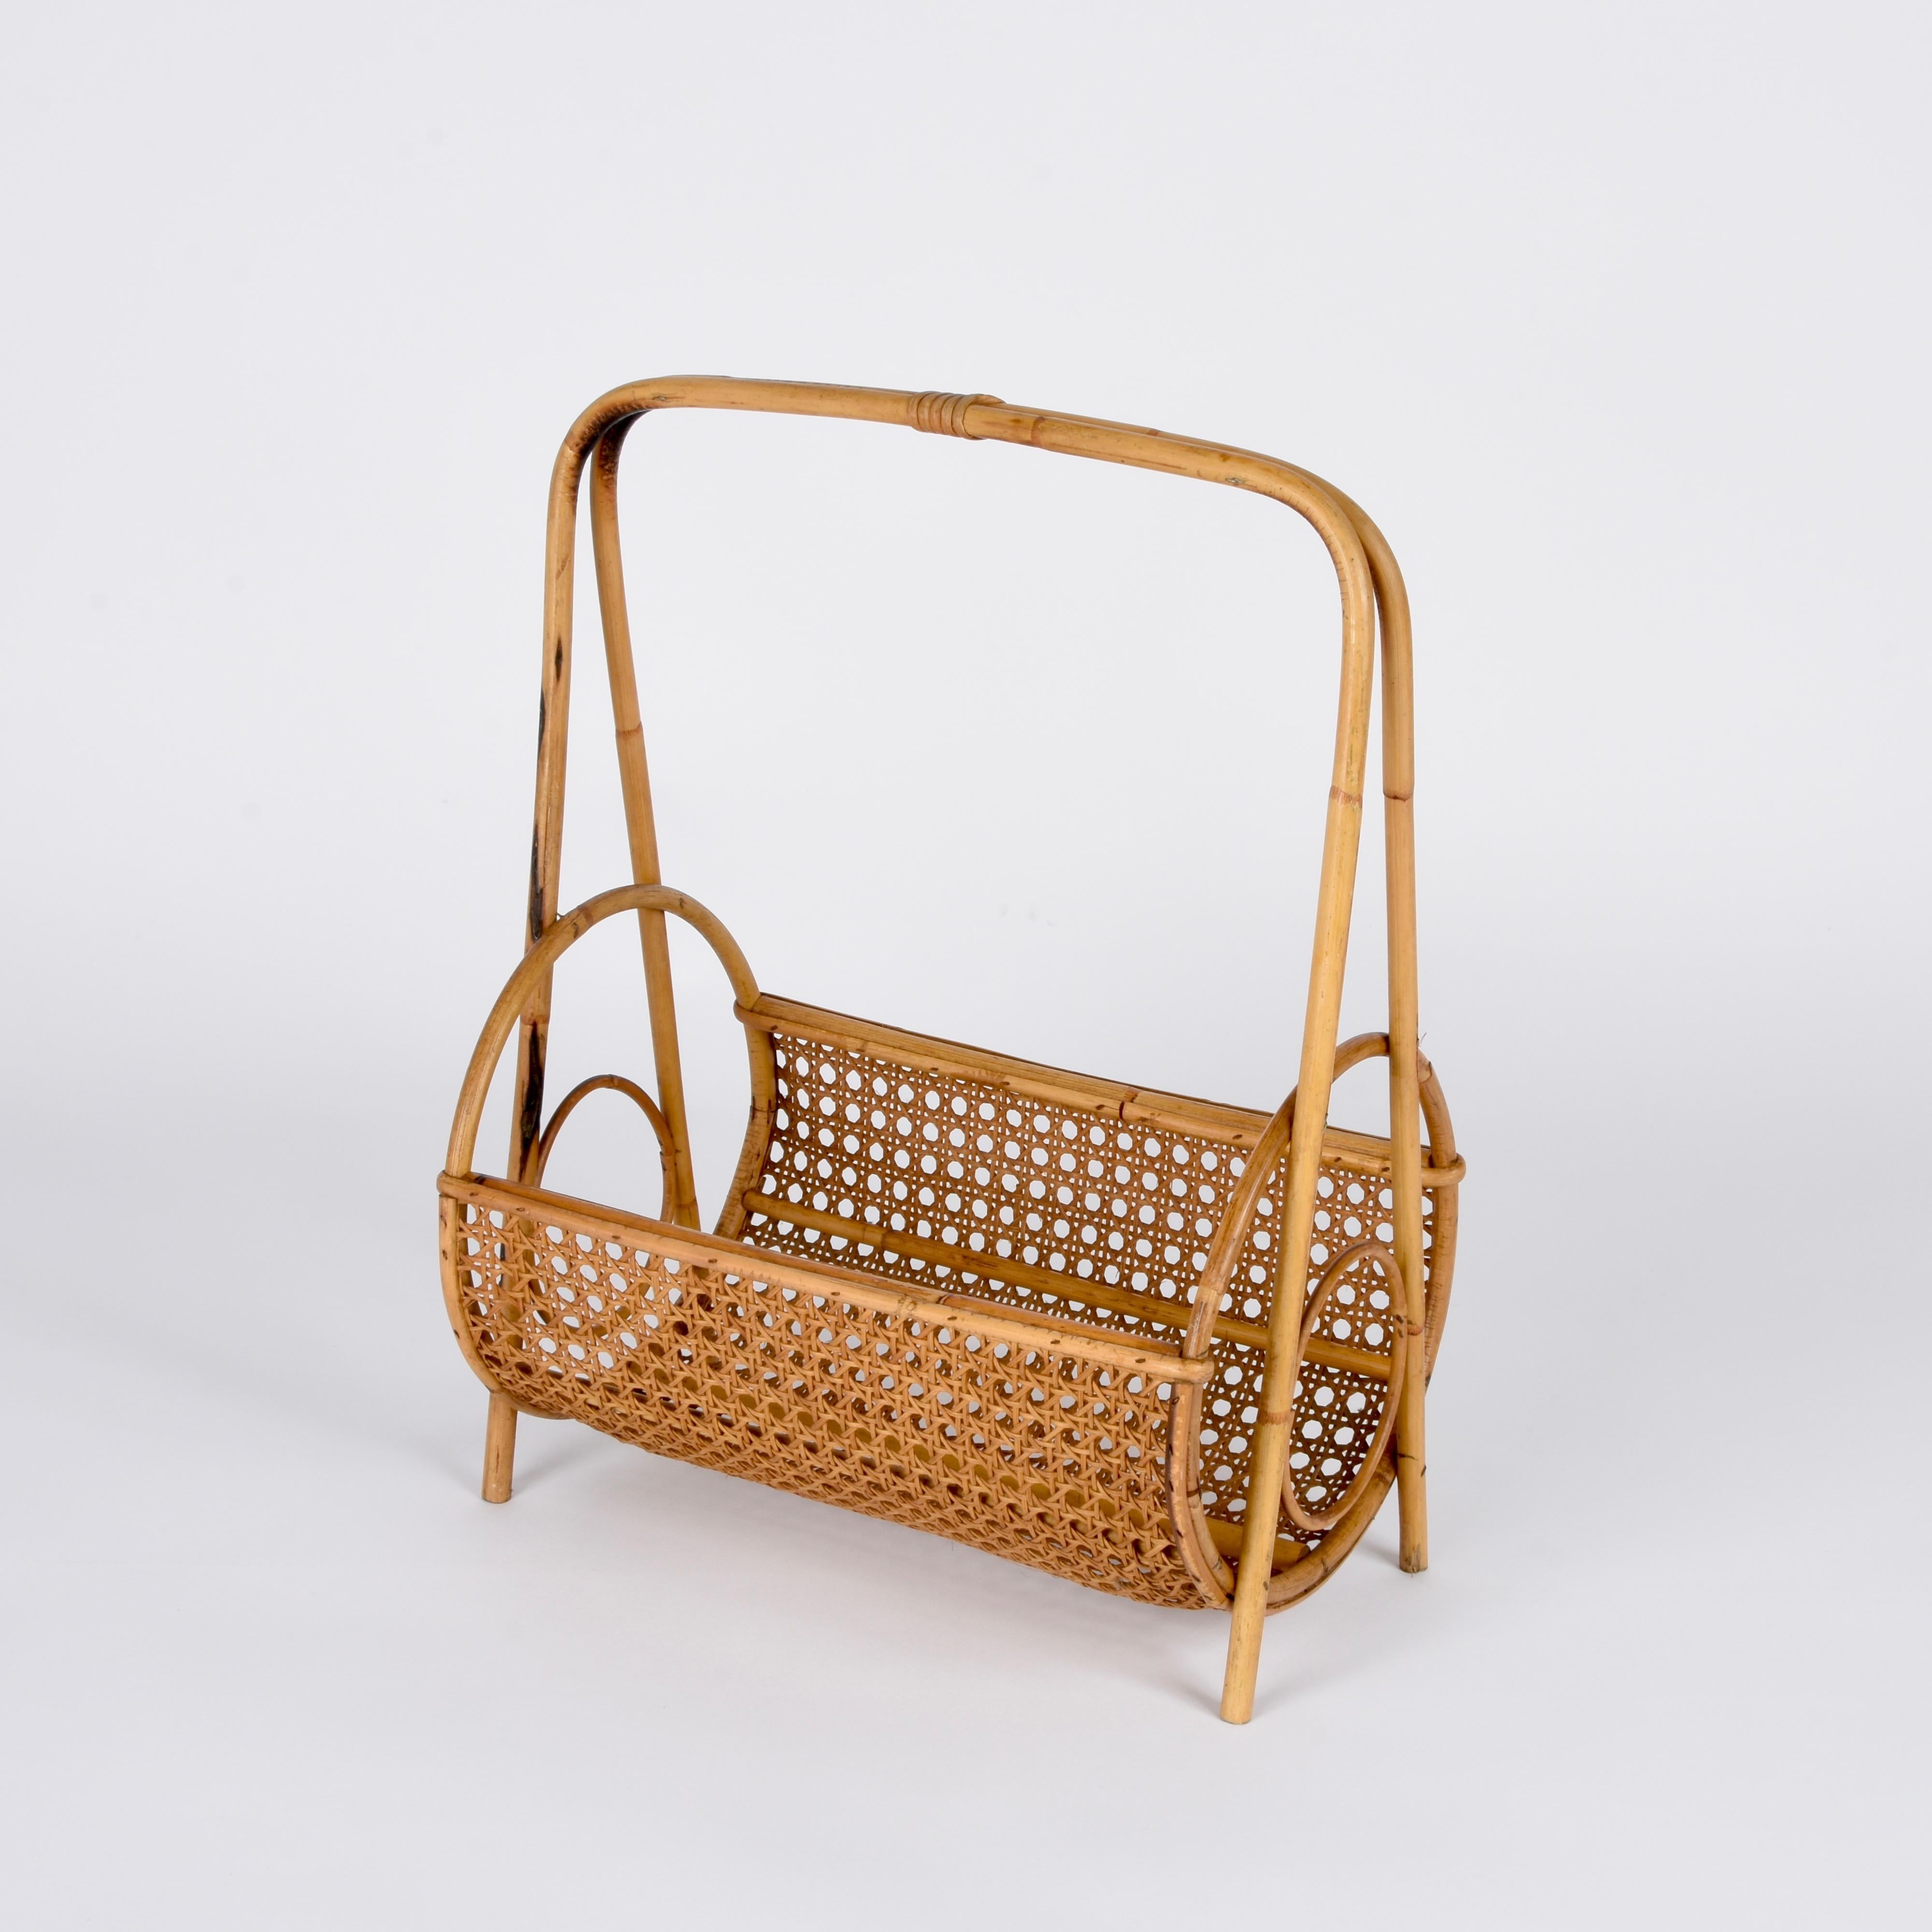 Stunning midcentury French Riviera bamboo and rattan magazine rack with a unique circular shape made in original Vienna Straw.

This item was produced in Italy during the 1960s.

An astonishing piece that will enrich a midcentury-style living